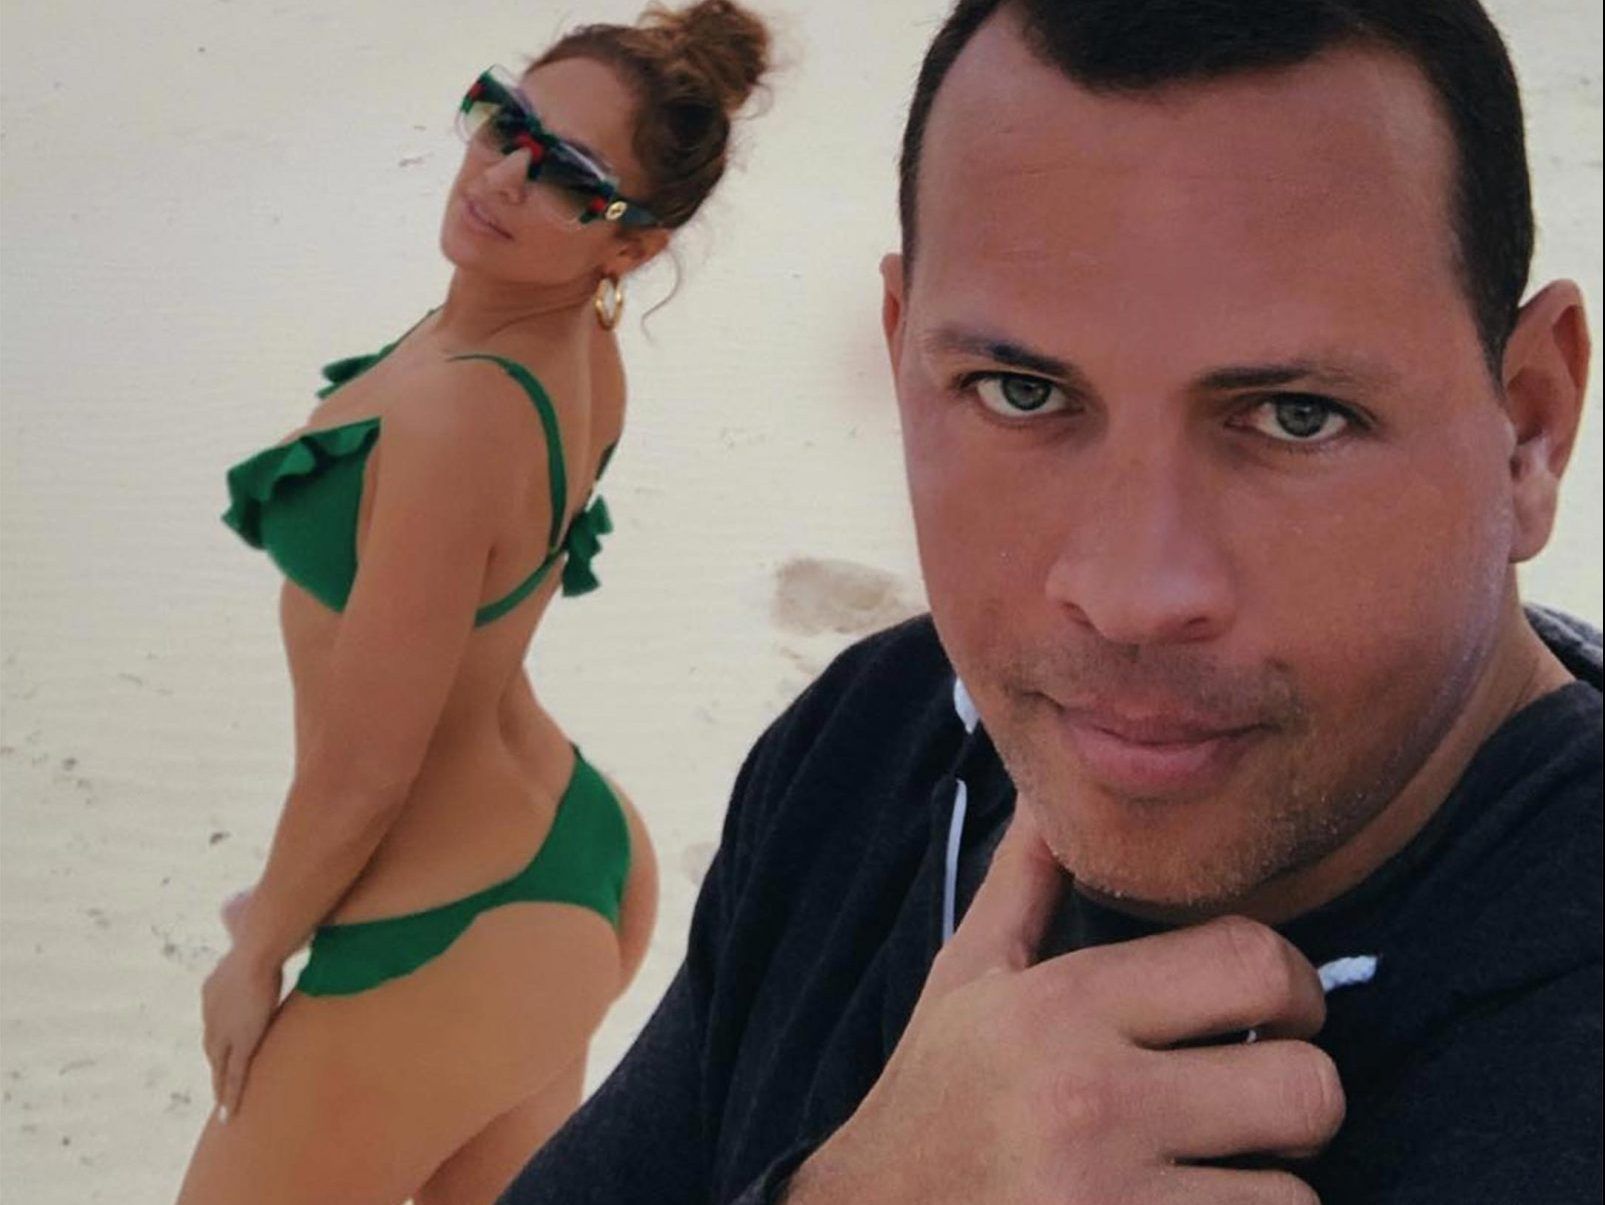 Jennifer Lopez & Alex Rodriguez Vacation with Kids in Israel